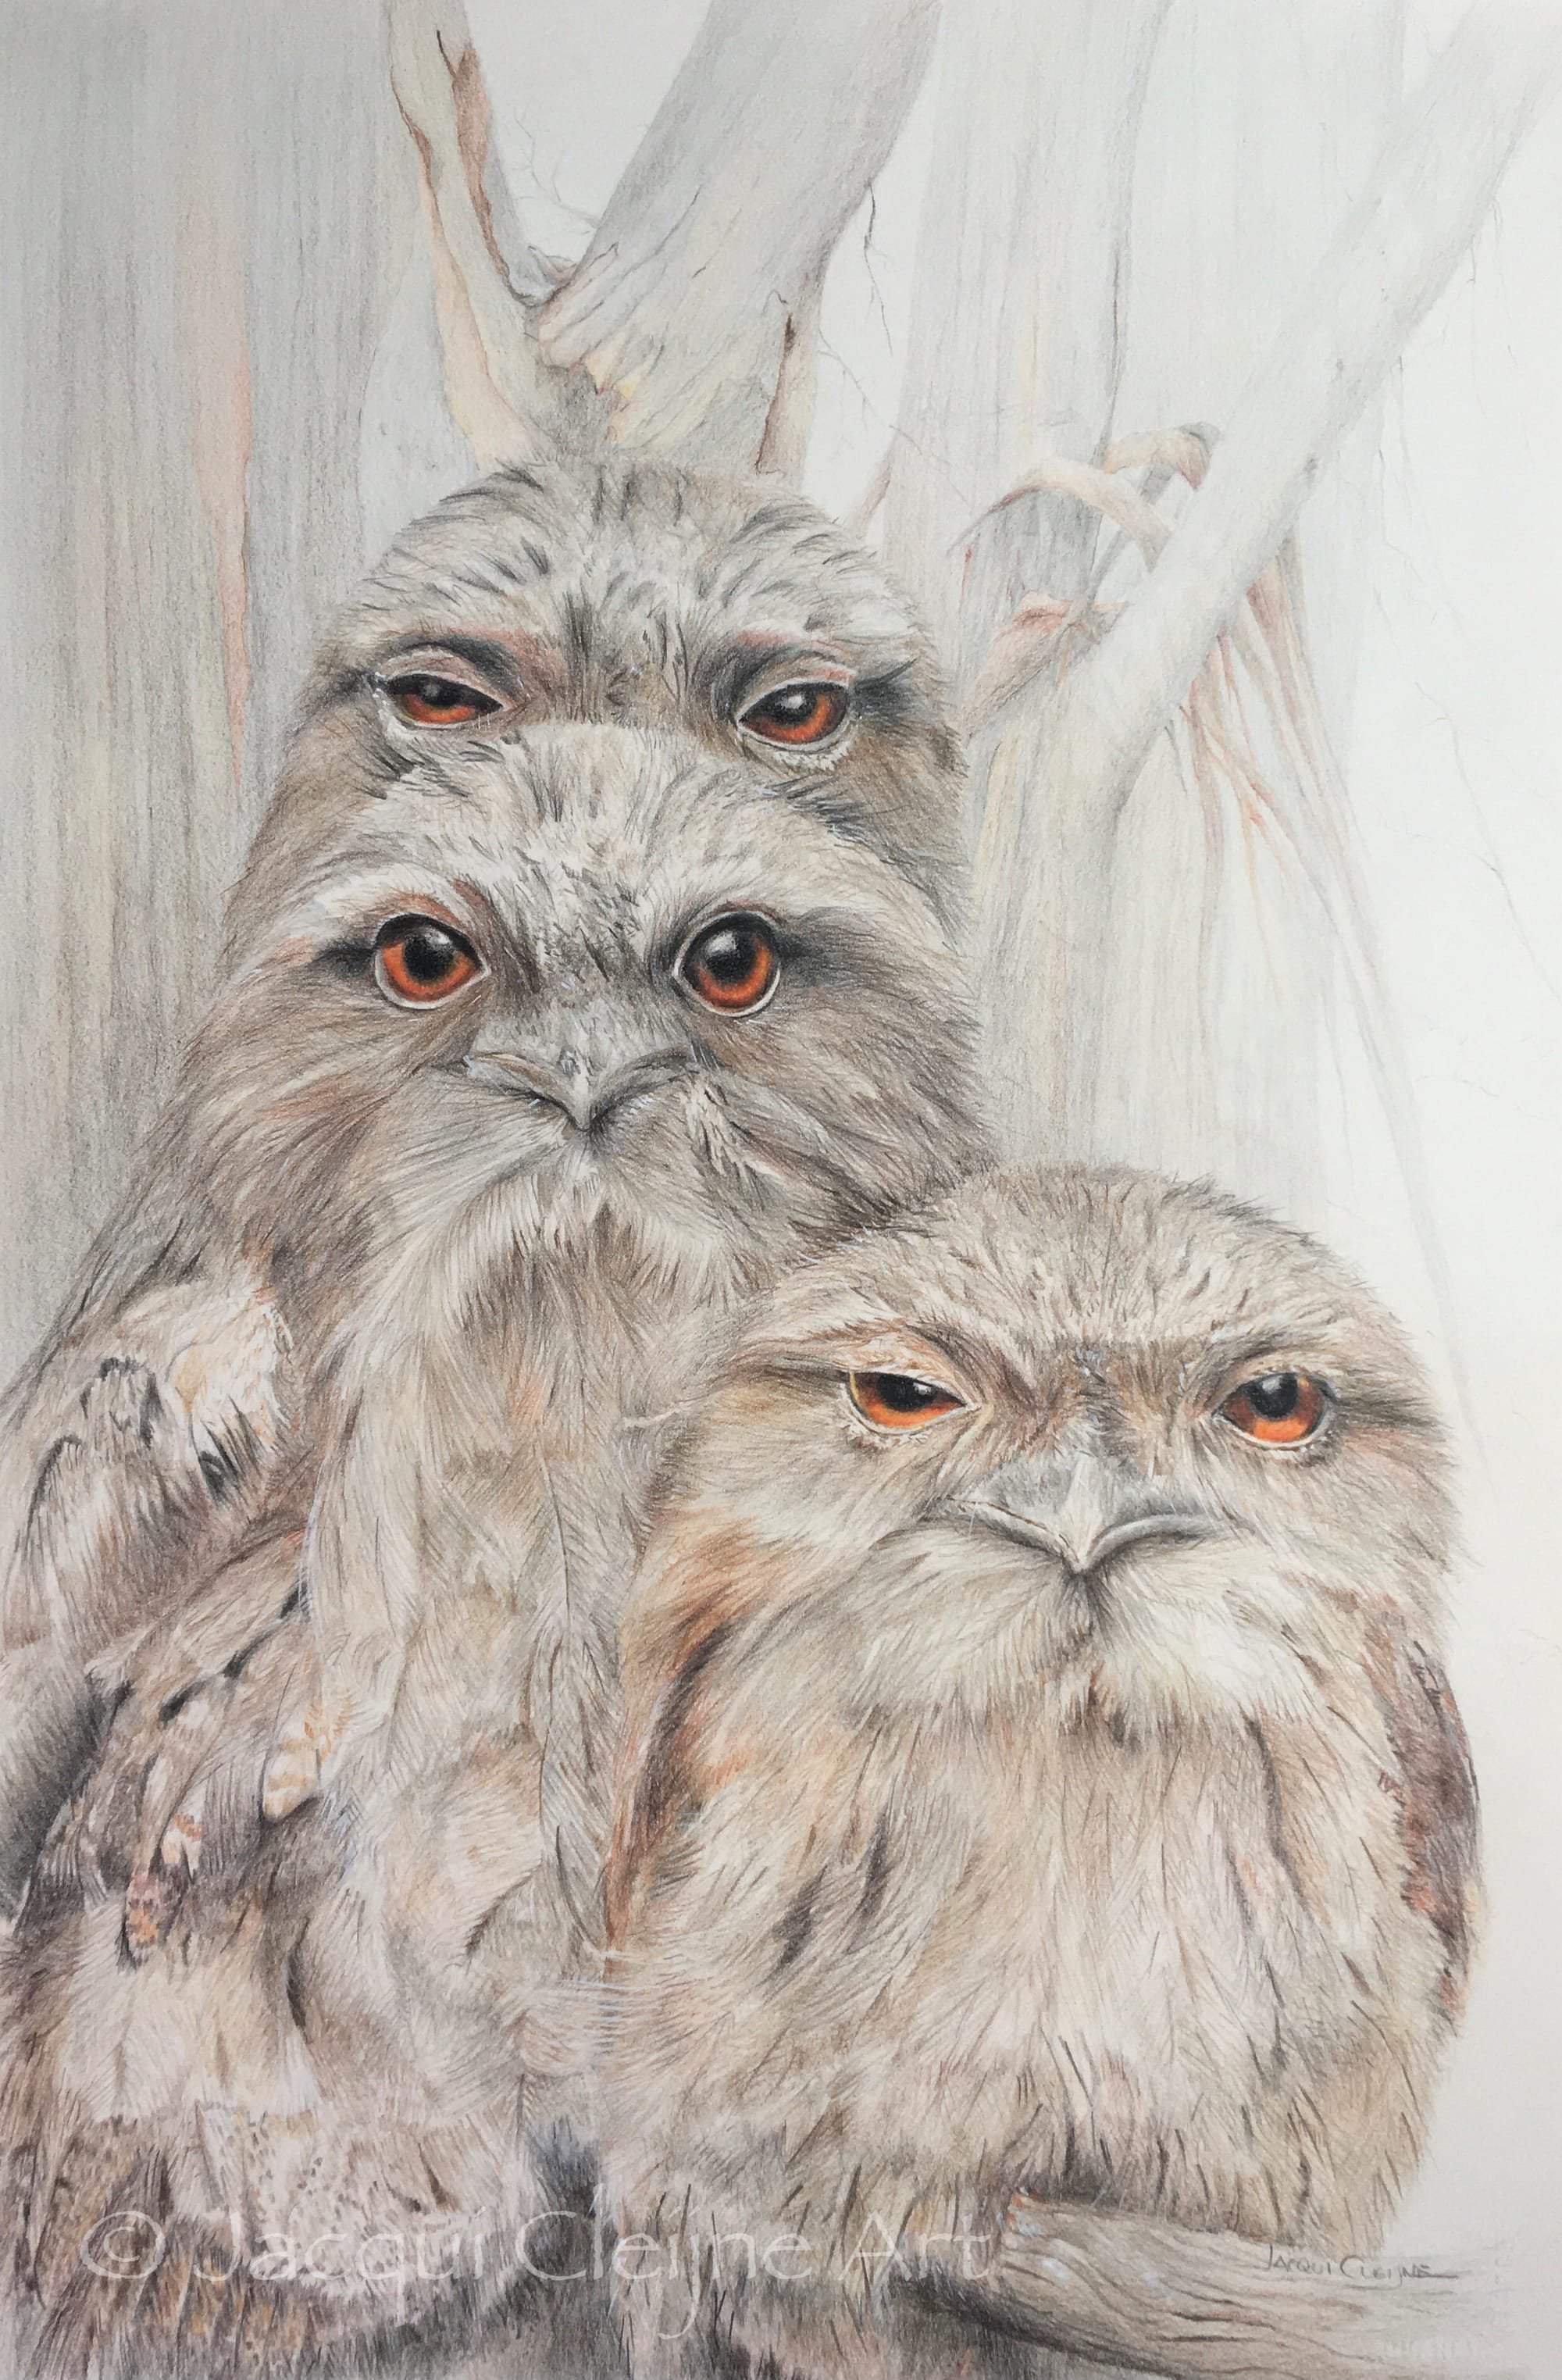 "Tawny Frogmouth Family Series" - FOR SALE